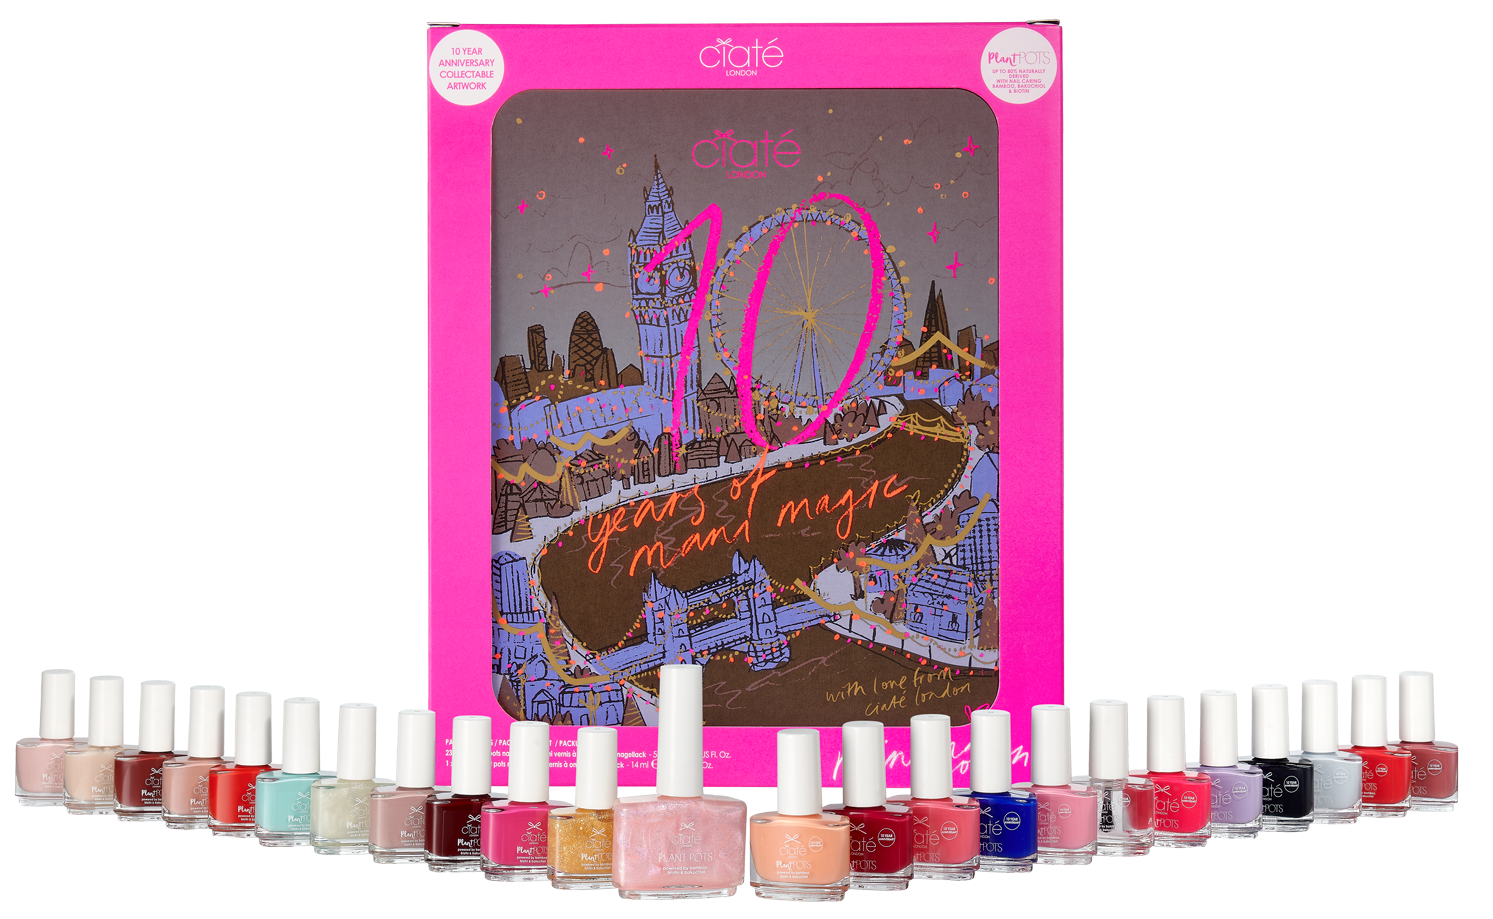 Ciate-Mini-Mani-Month-2022-Pack-and-Contents